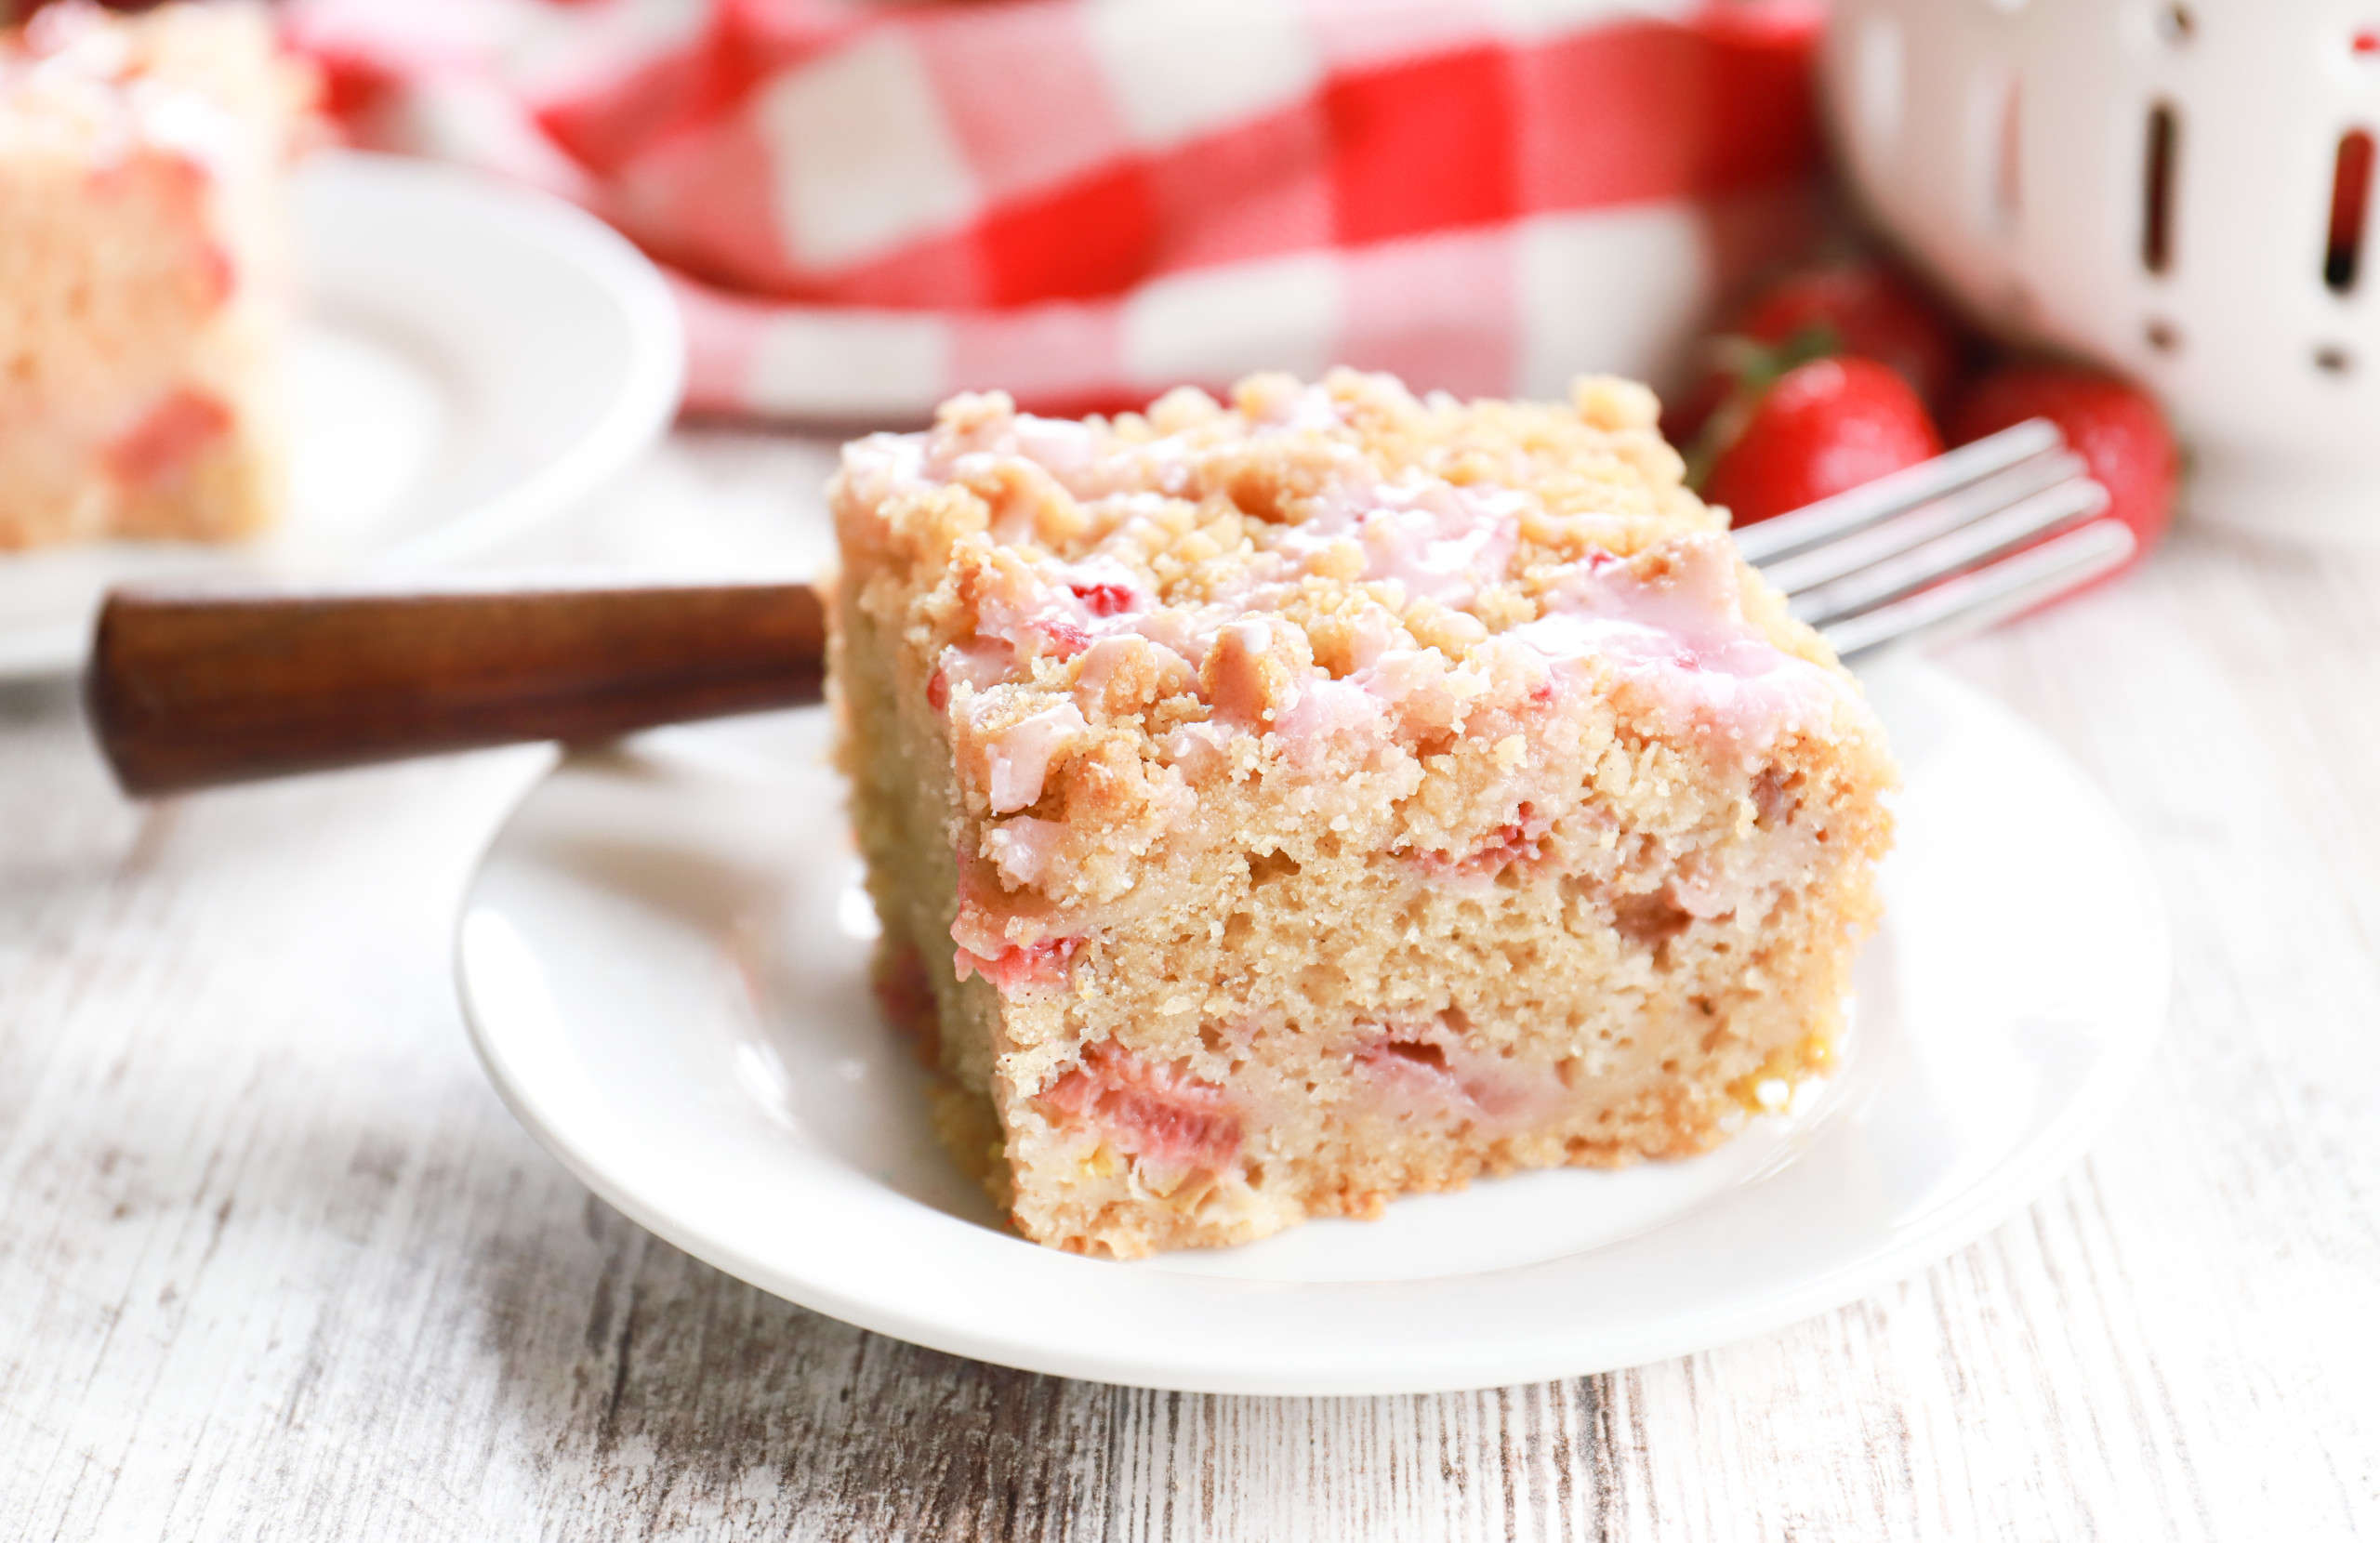 Side view of a piece of strawberry rhubarb crumb cake on a small white plate with a wooden handled fork resting on the plate.